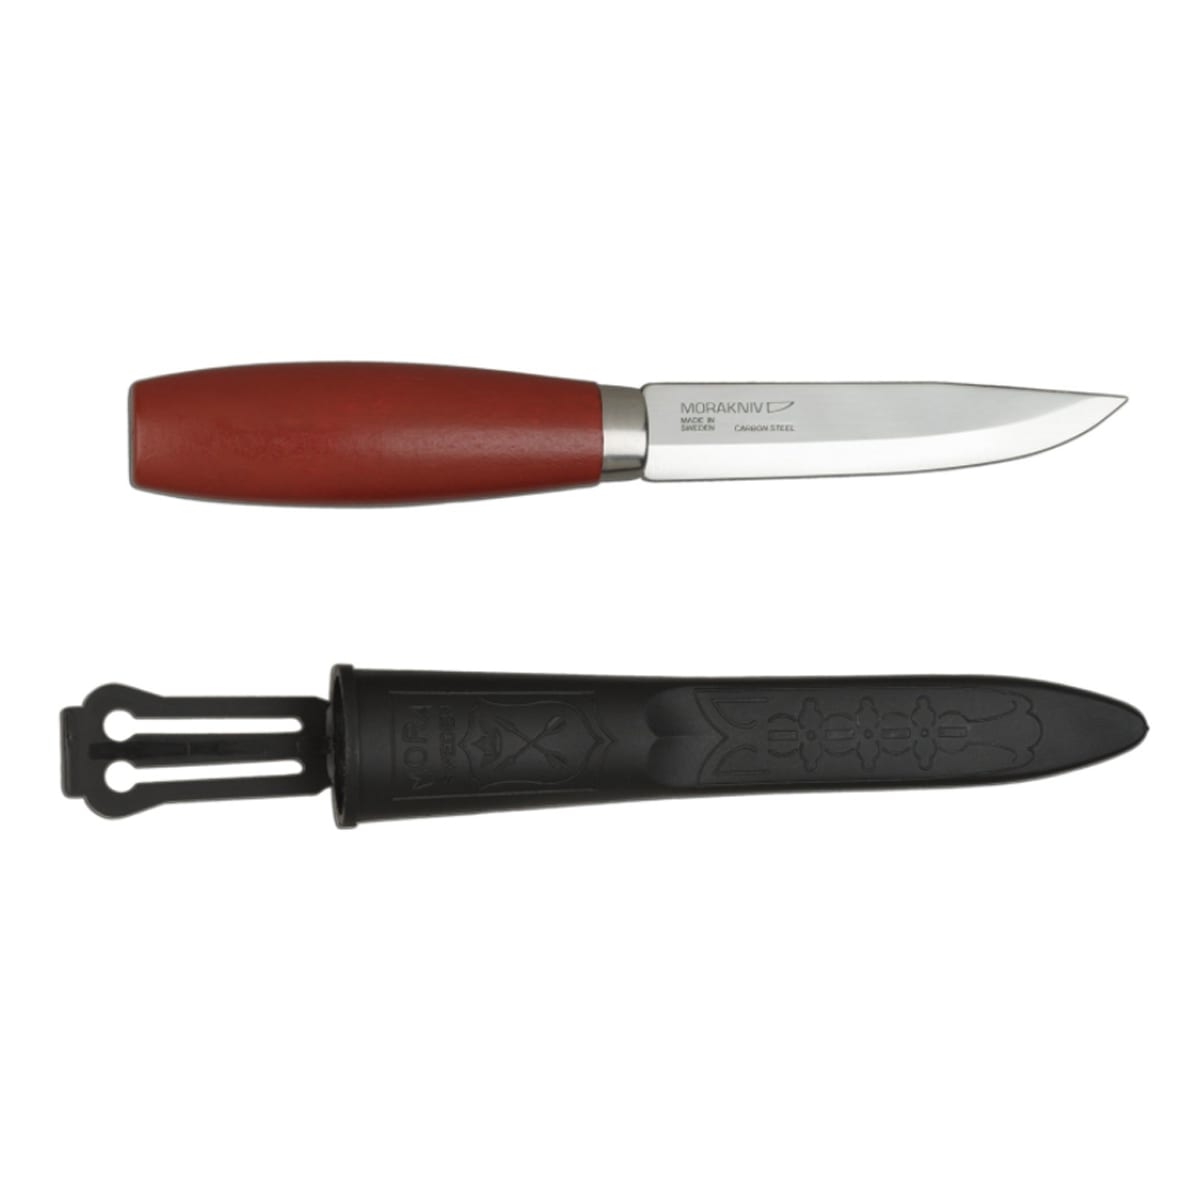 Hectares Wither Dead in the world Morakniv Classic No 2 Carbon Steel Bushcraft Woodcarving Knife